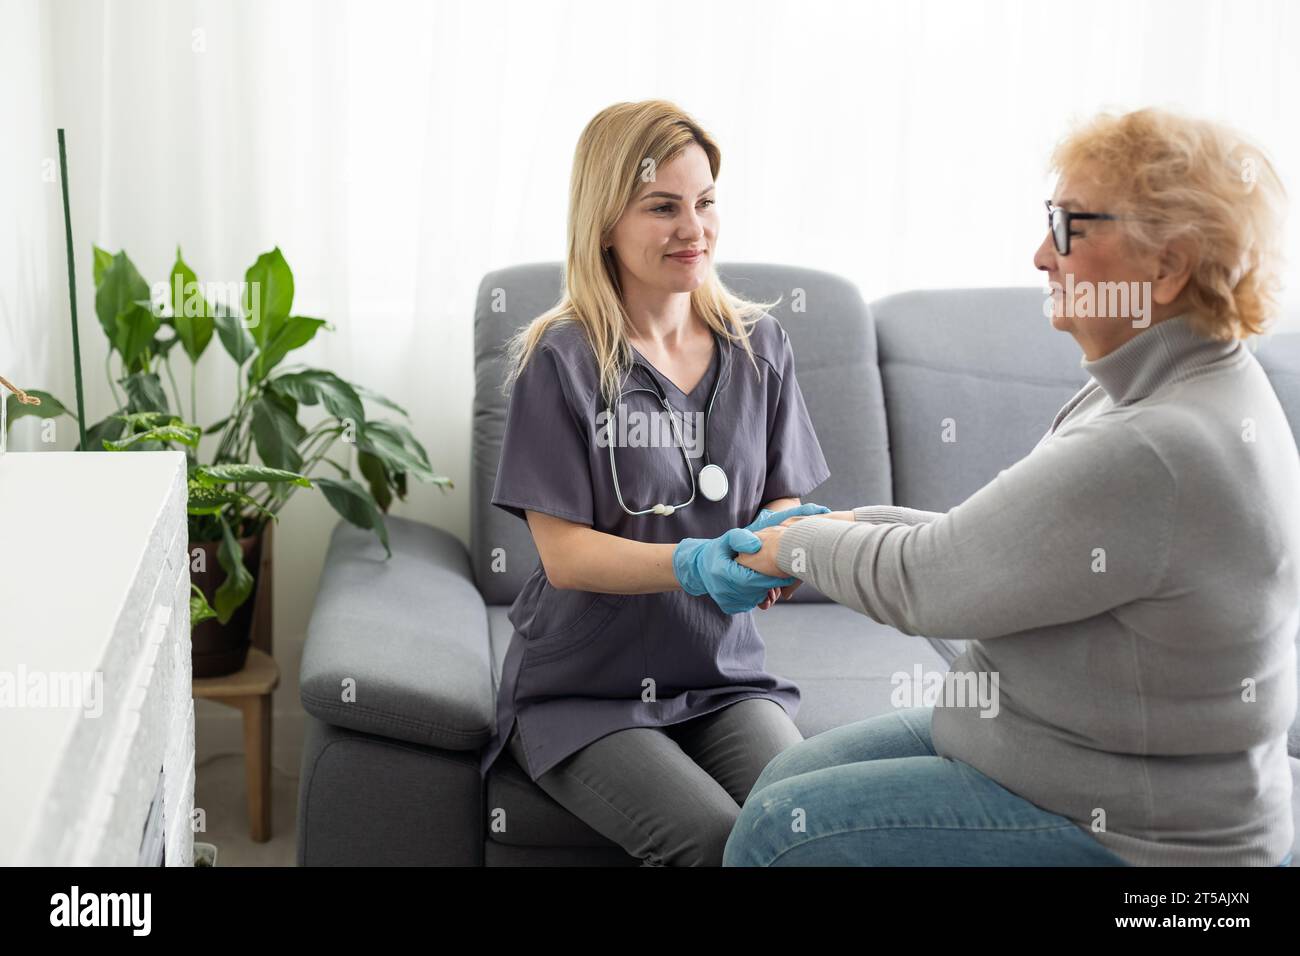 Caring young nurse doctor carer helping holding hands of happy disabled handicapped or injured old adult elder woman having disability health problem Stock Photo